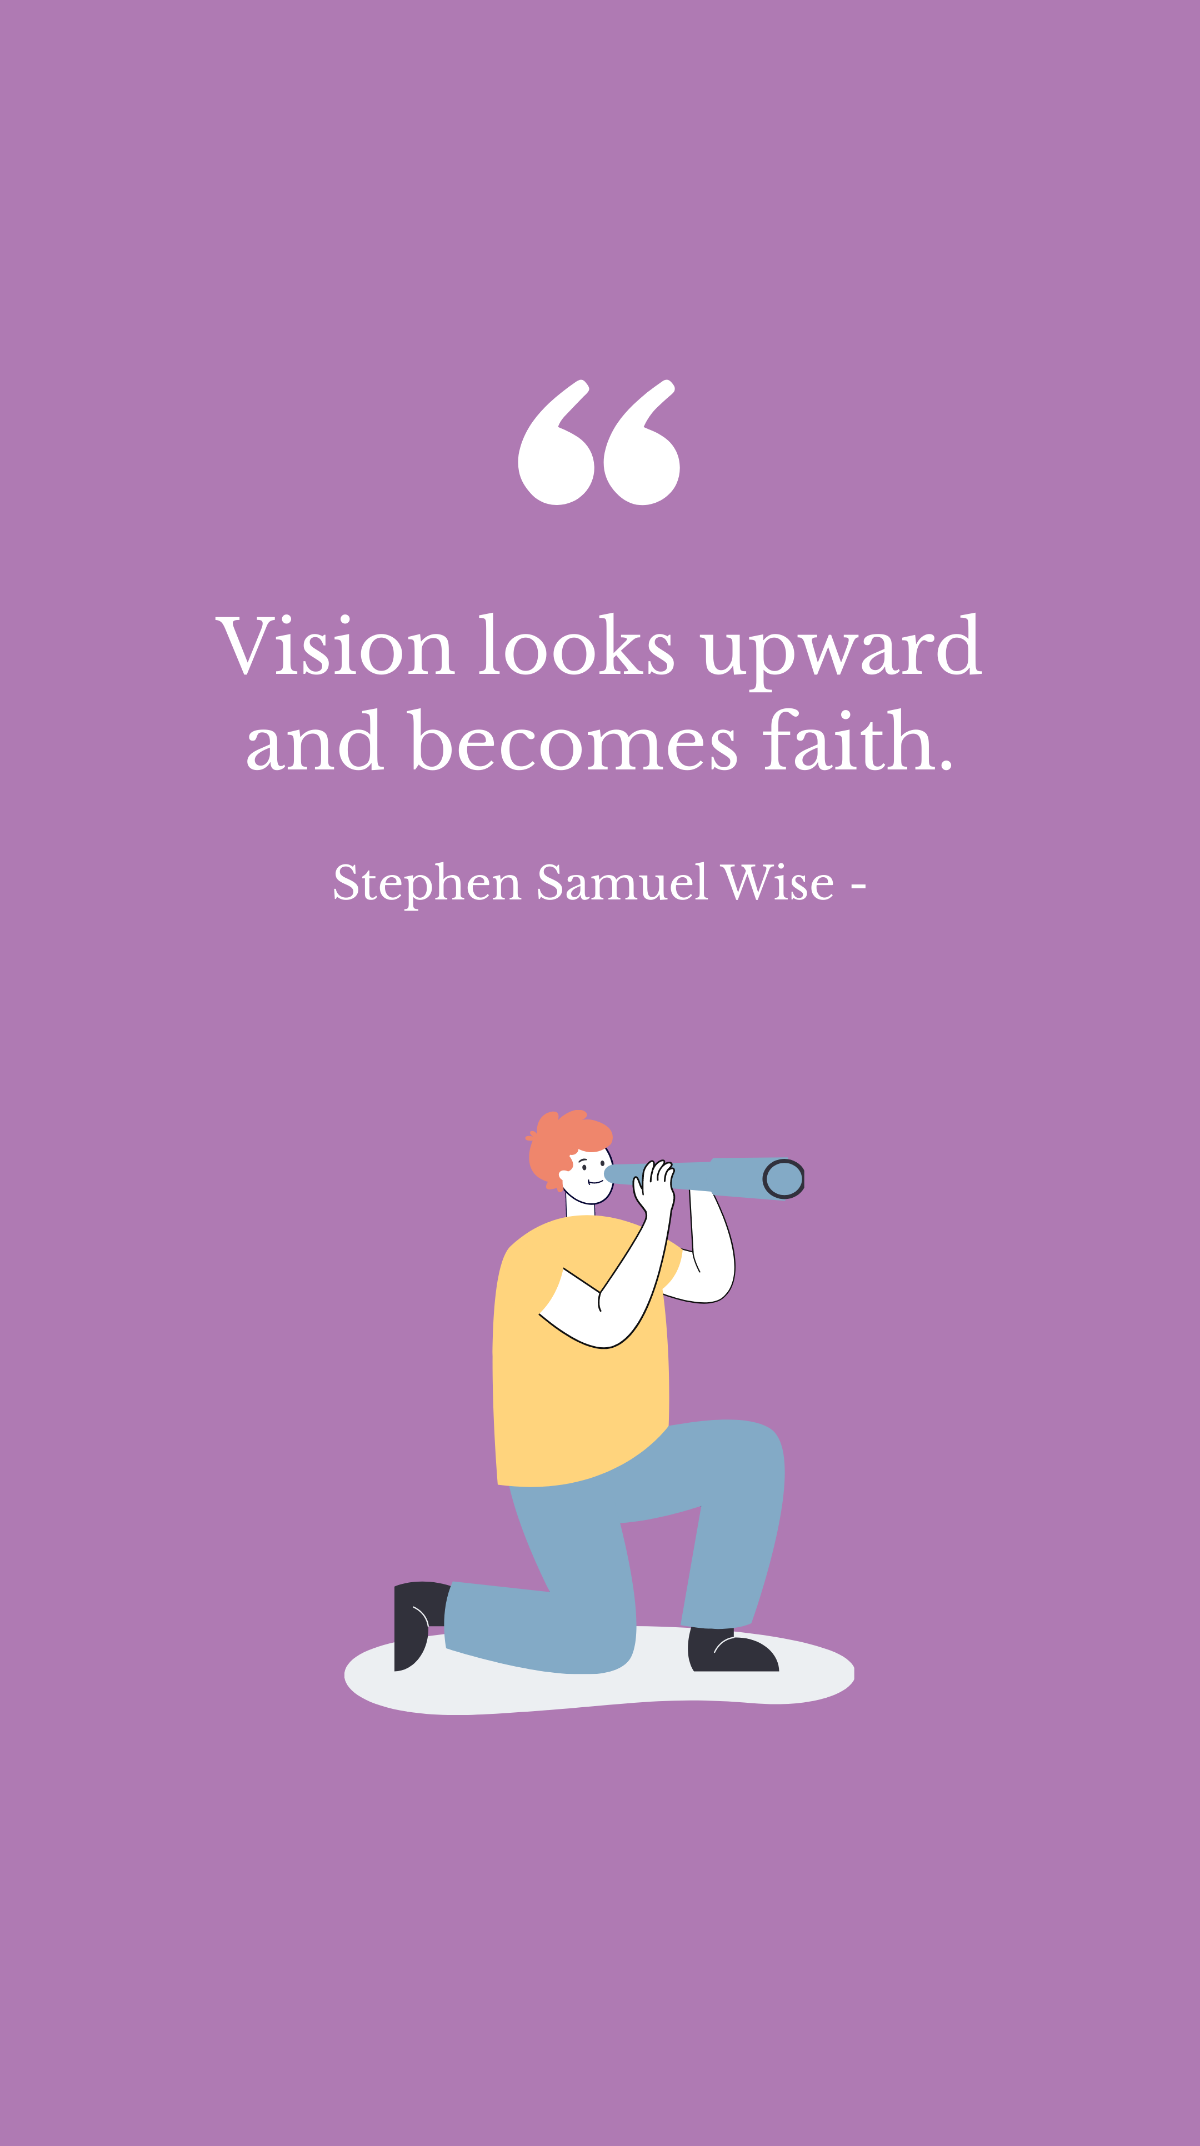 Stephen Samuel Wise - Vision looks upward and becomes faith. Template